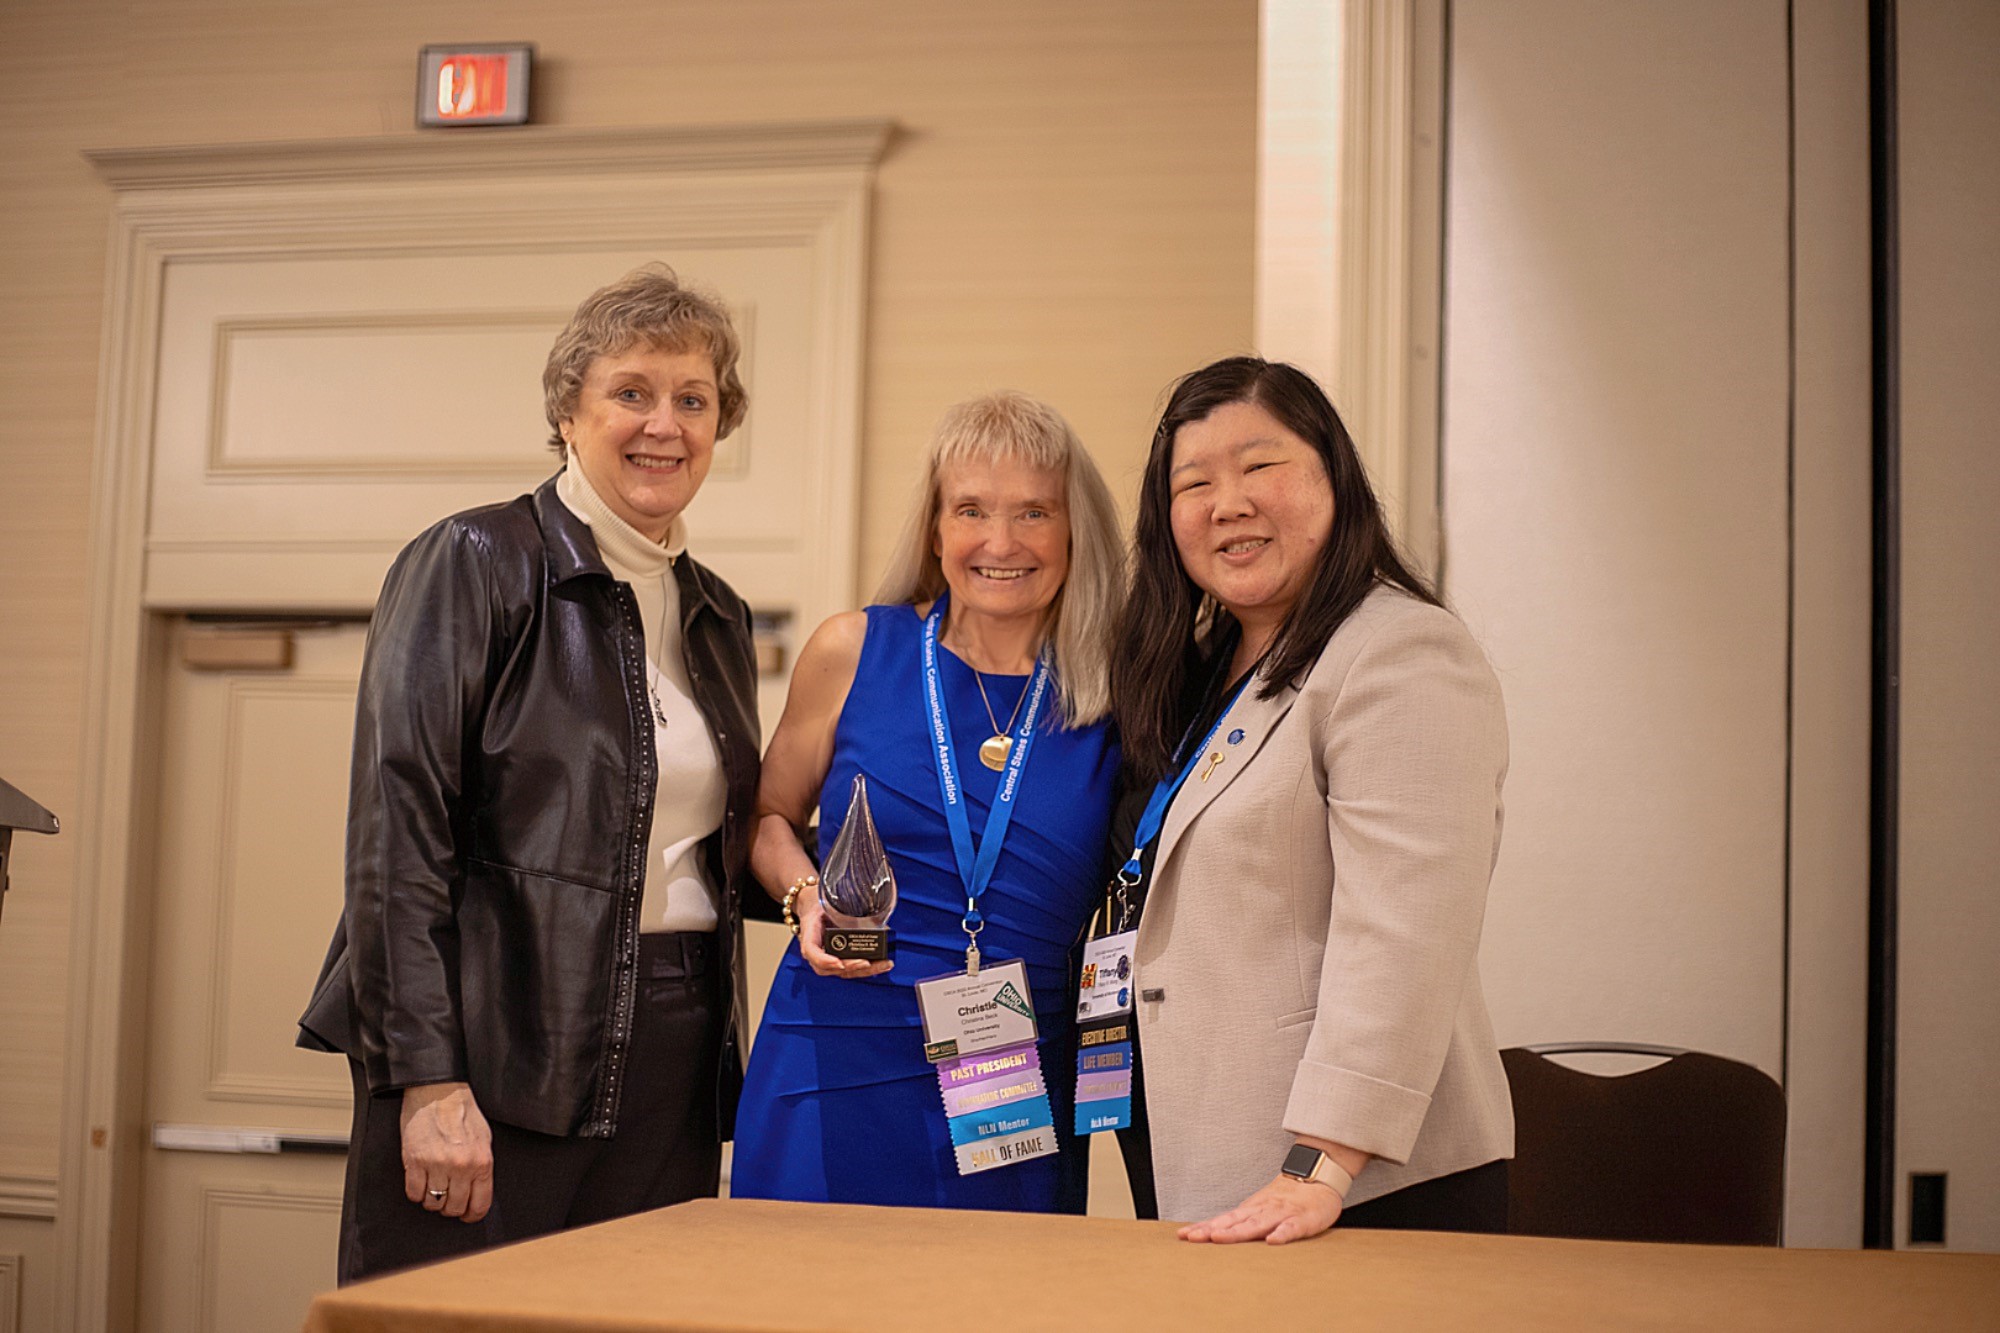 Dr. Debbie Ford, Dr. Christina Beck and Dr. Tiffany Wang